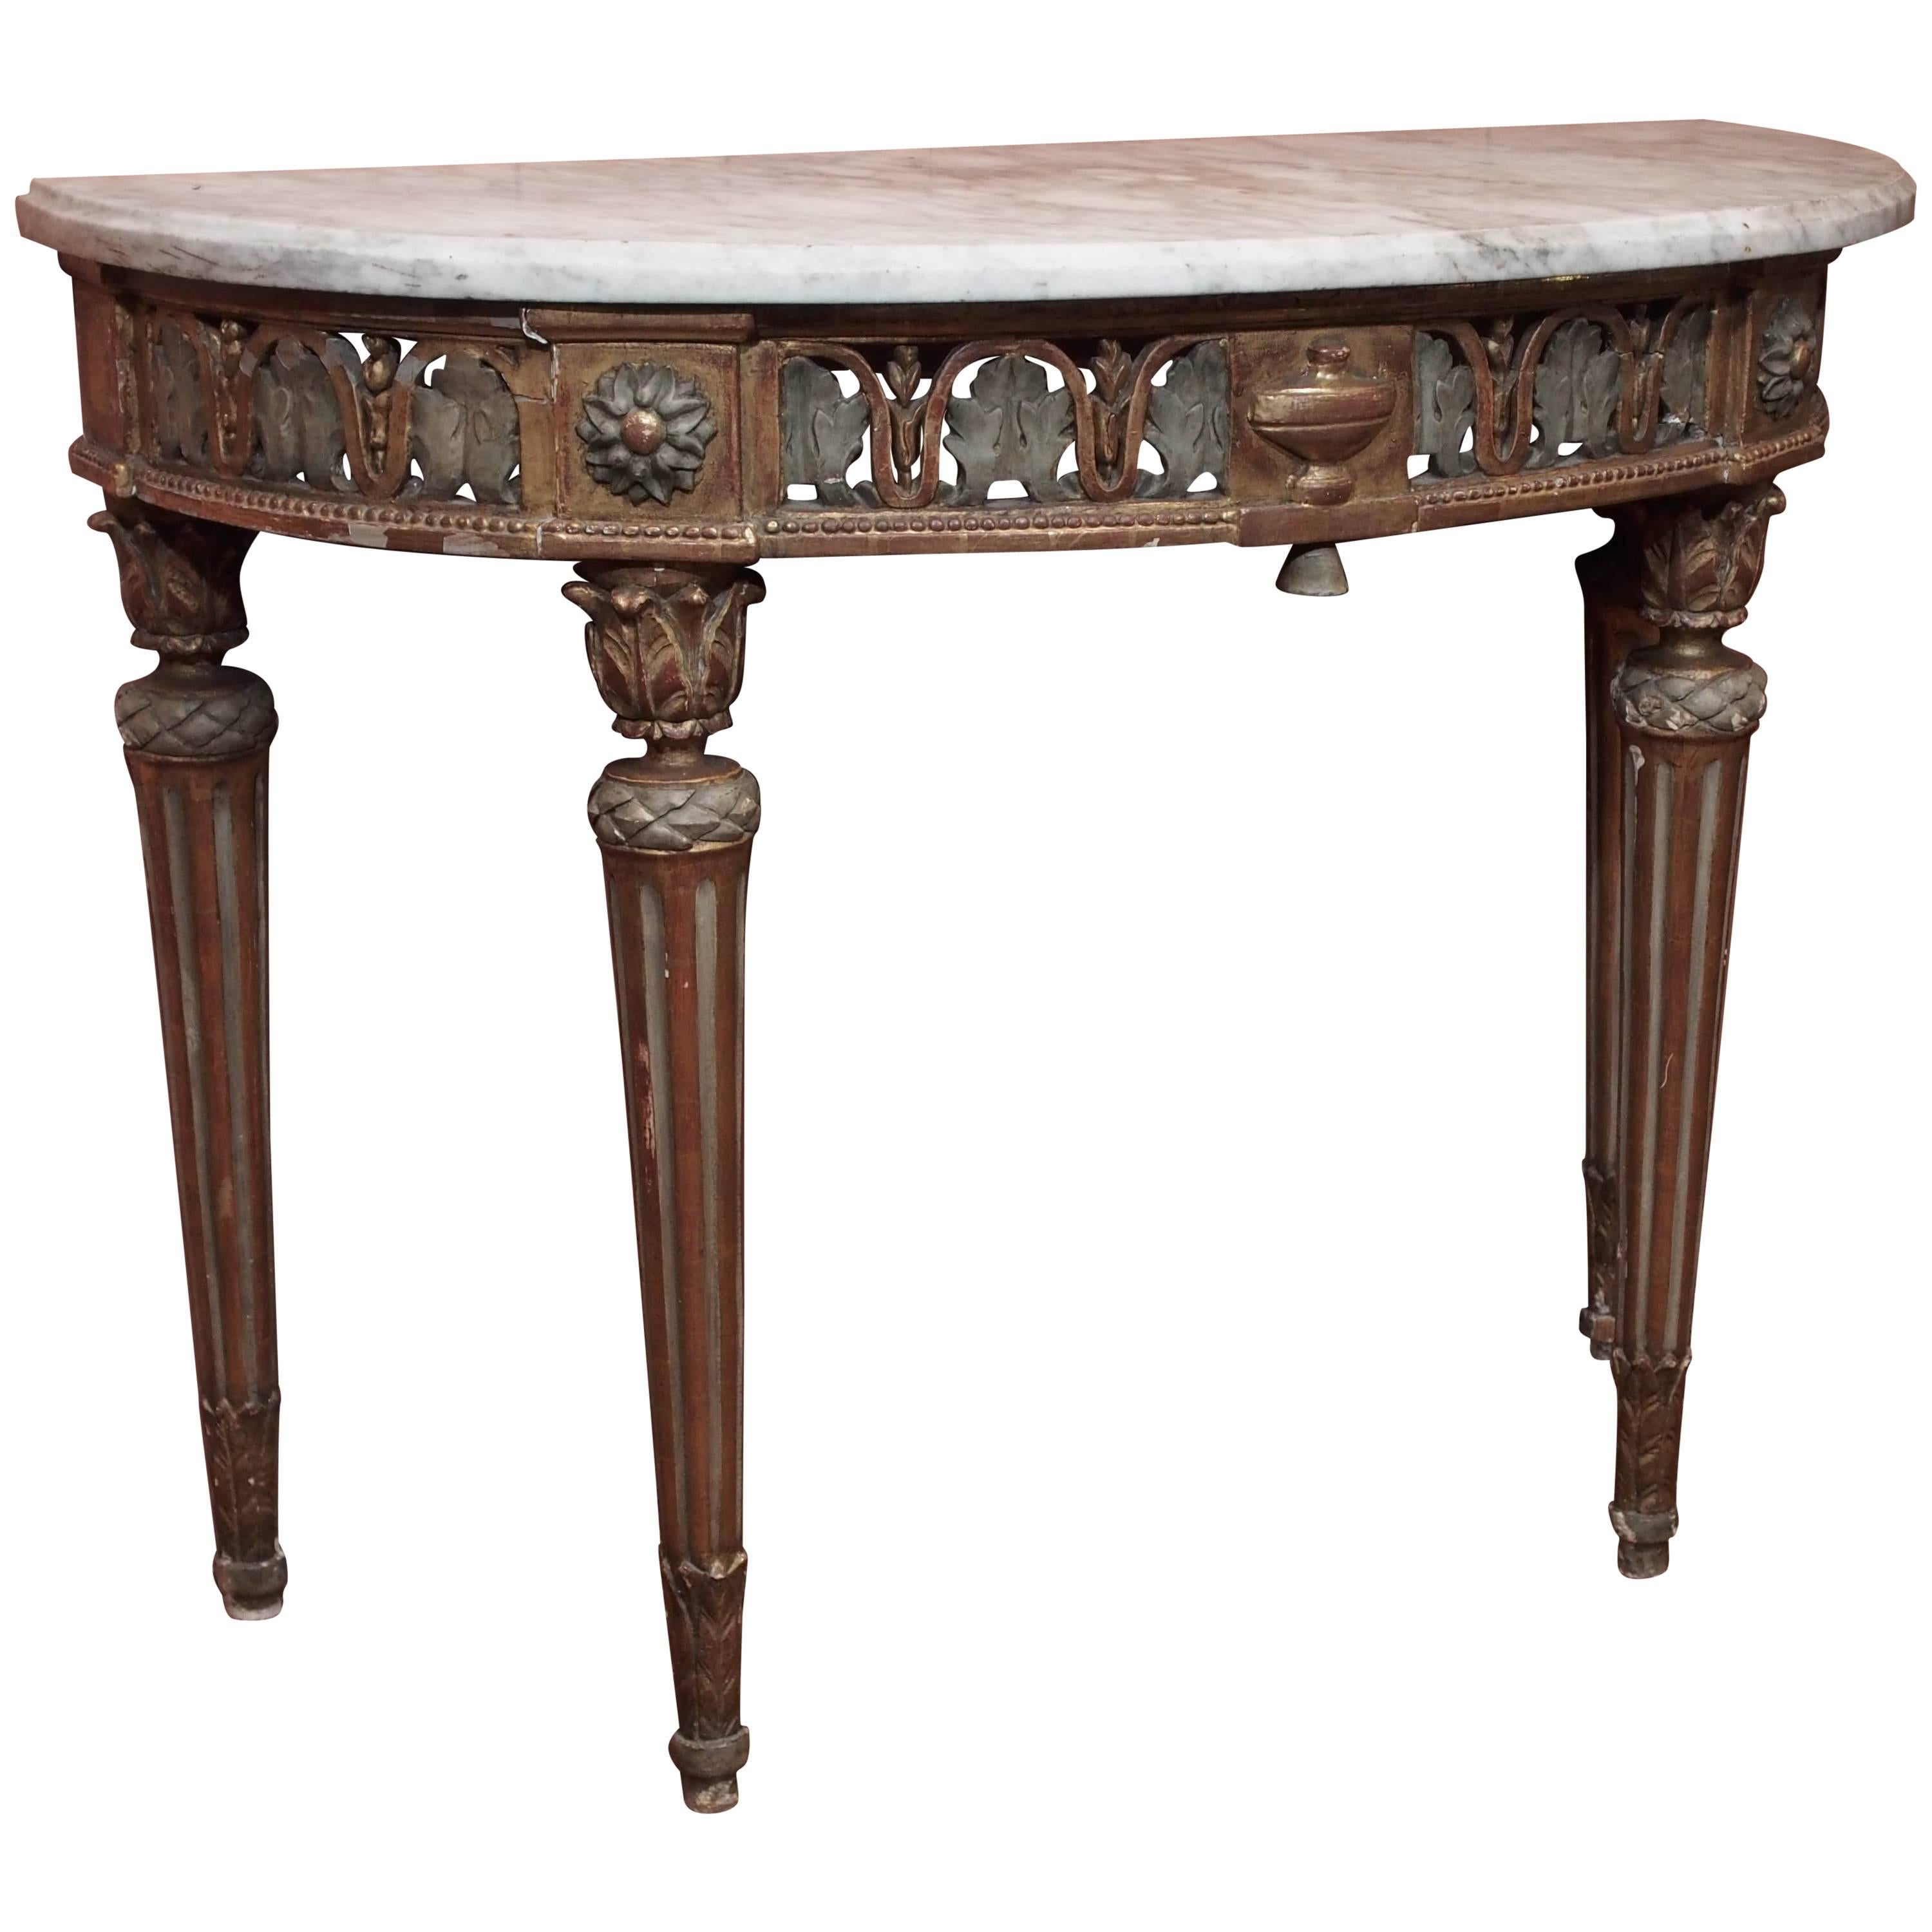 Louis XVI Period Painted and Gilded Dem-Lune Console with White Marble Top